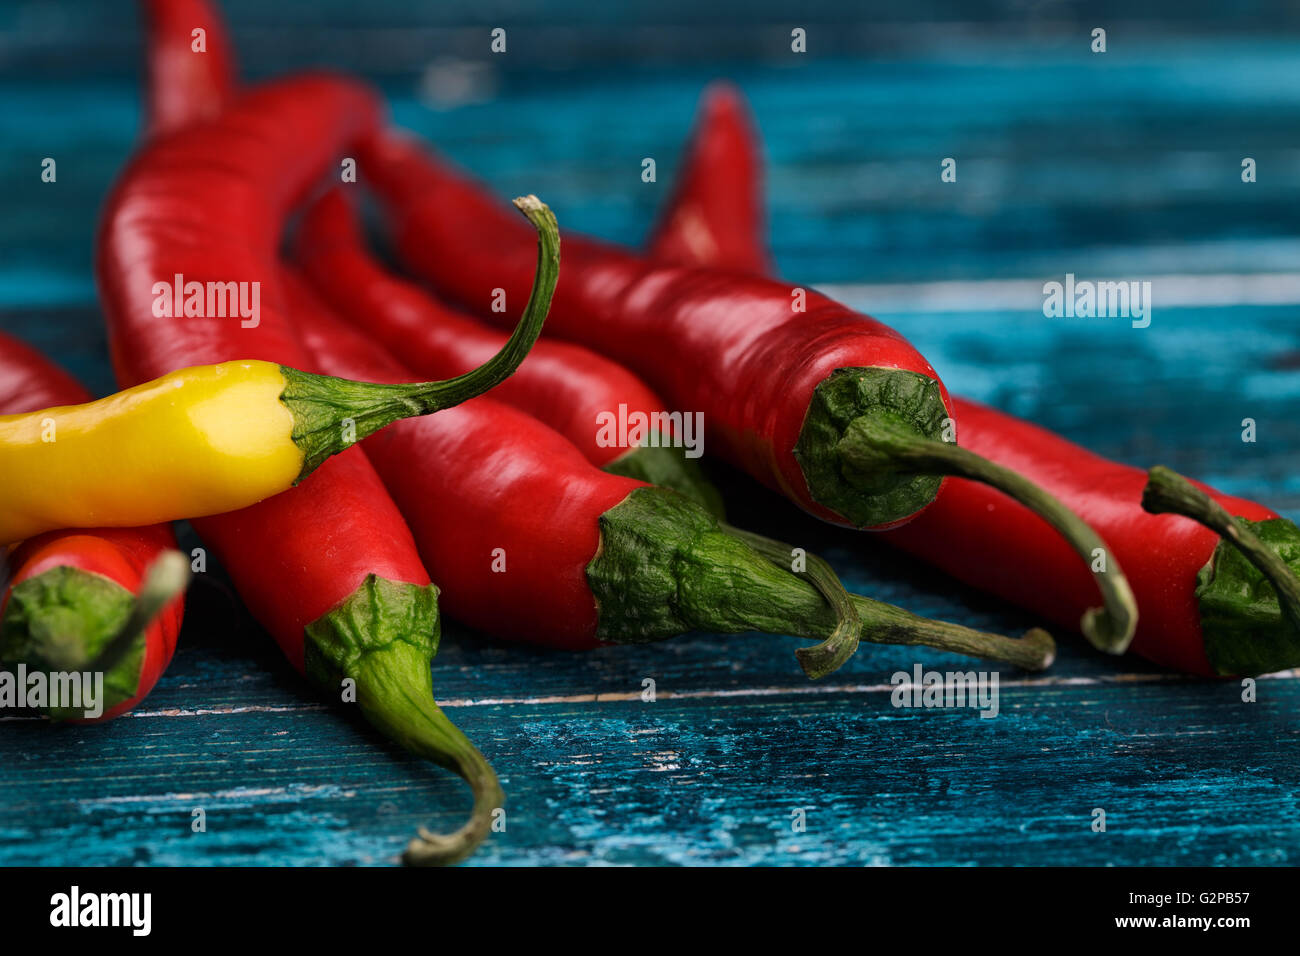 Red and Yellow Chili Pepper on blue wooden background Stock Photo